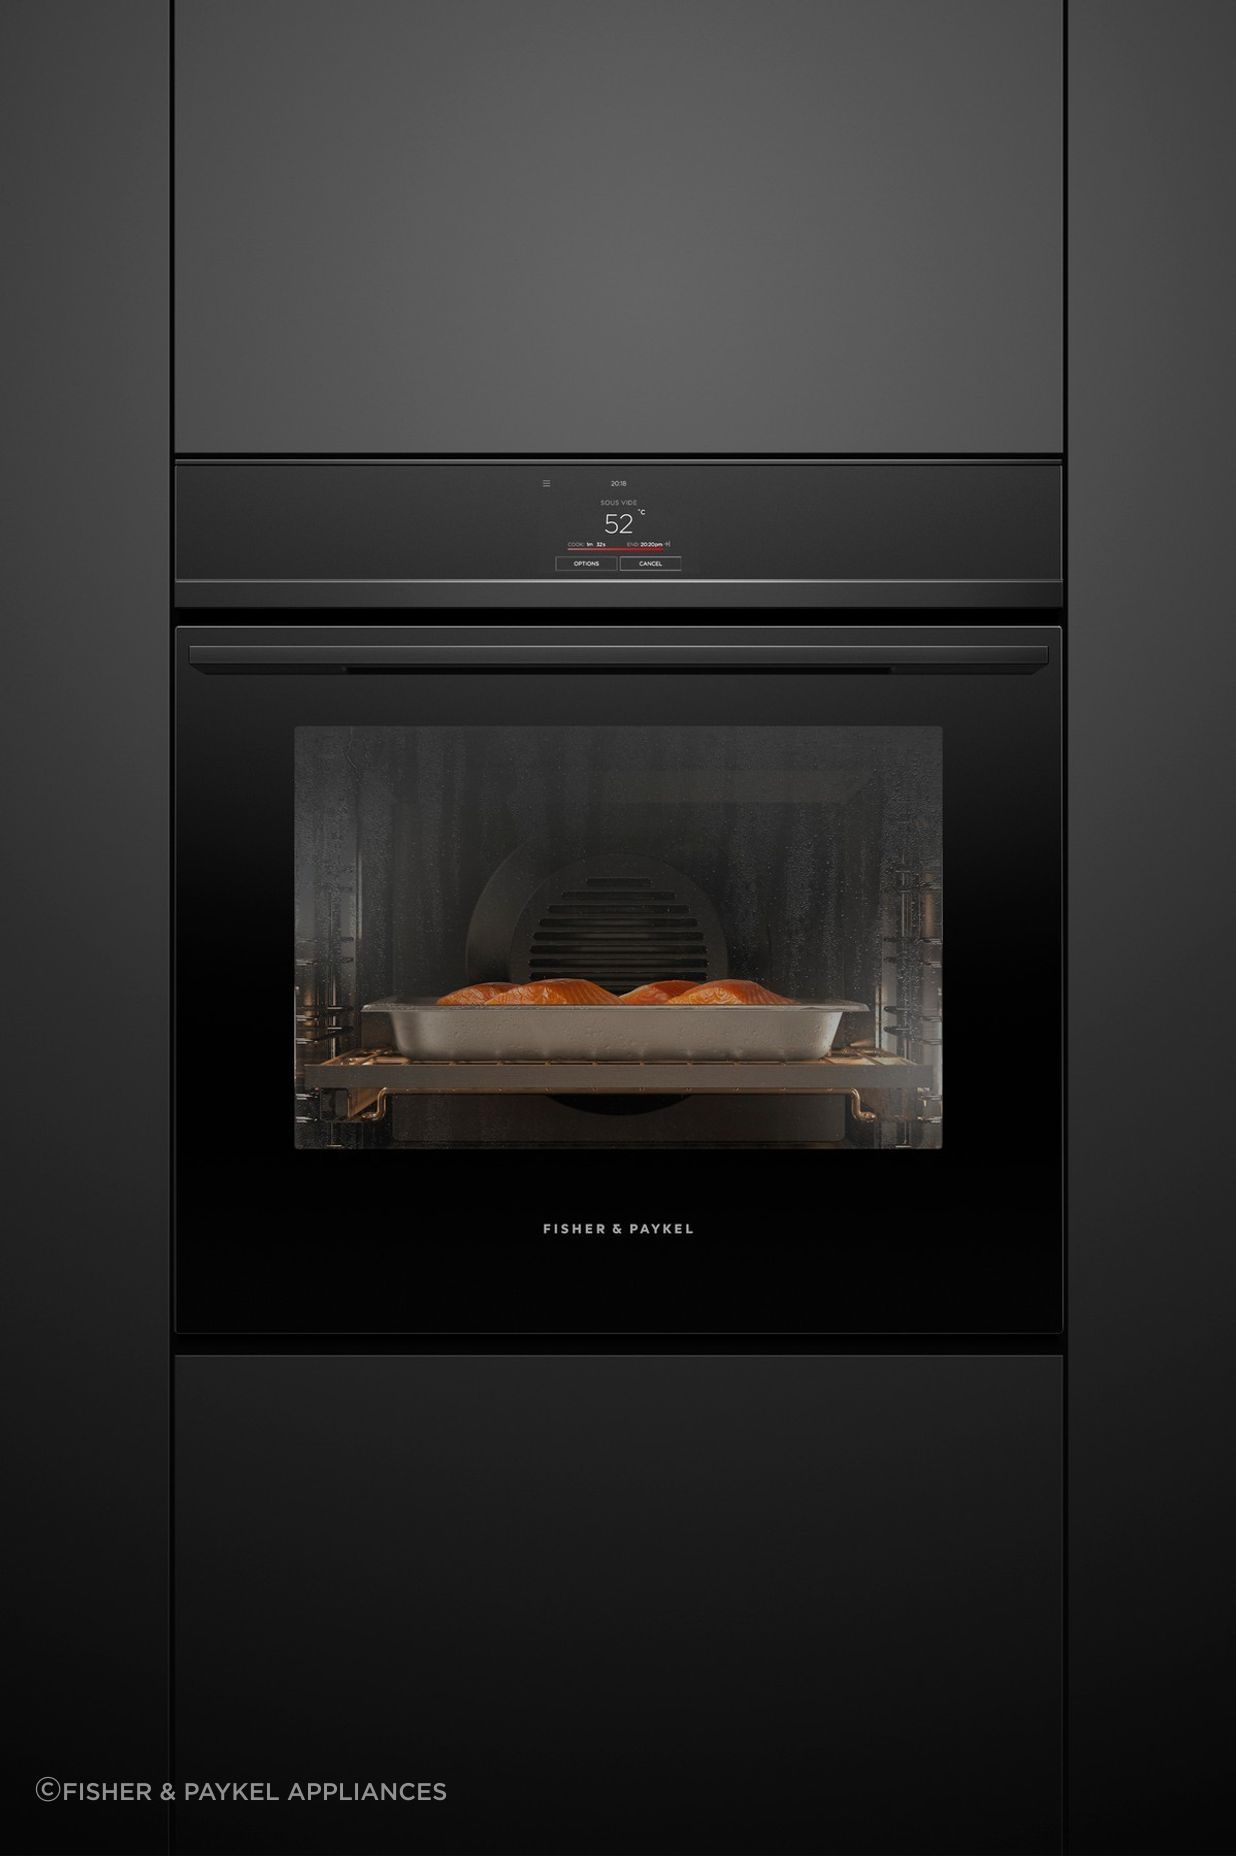 The 'Minimal' style oven from the Kitchen Perfection range